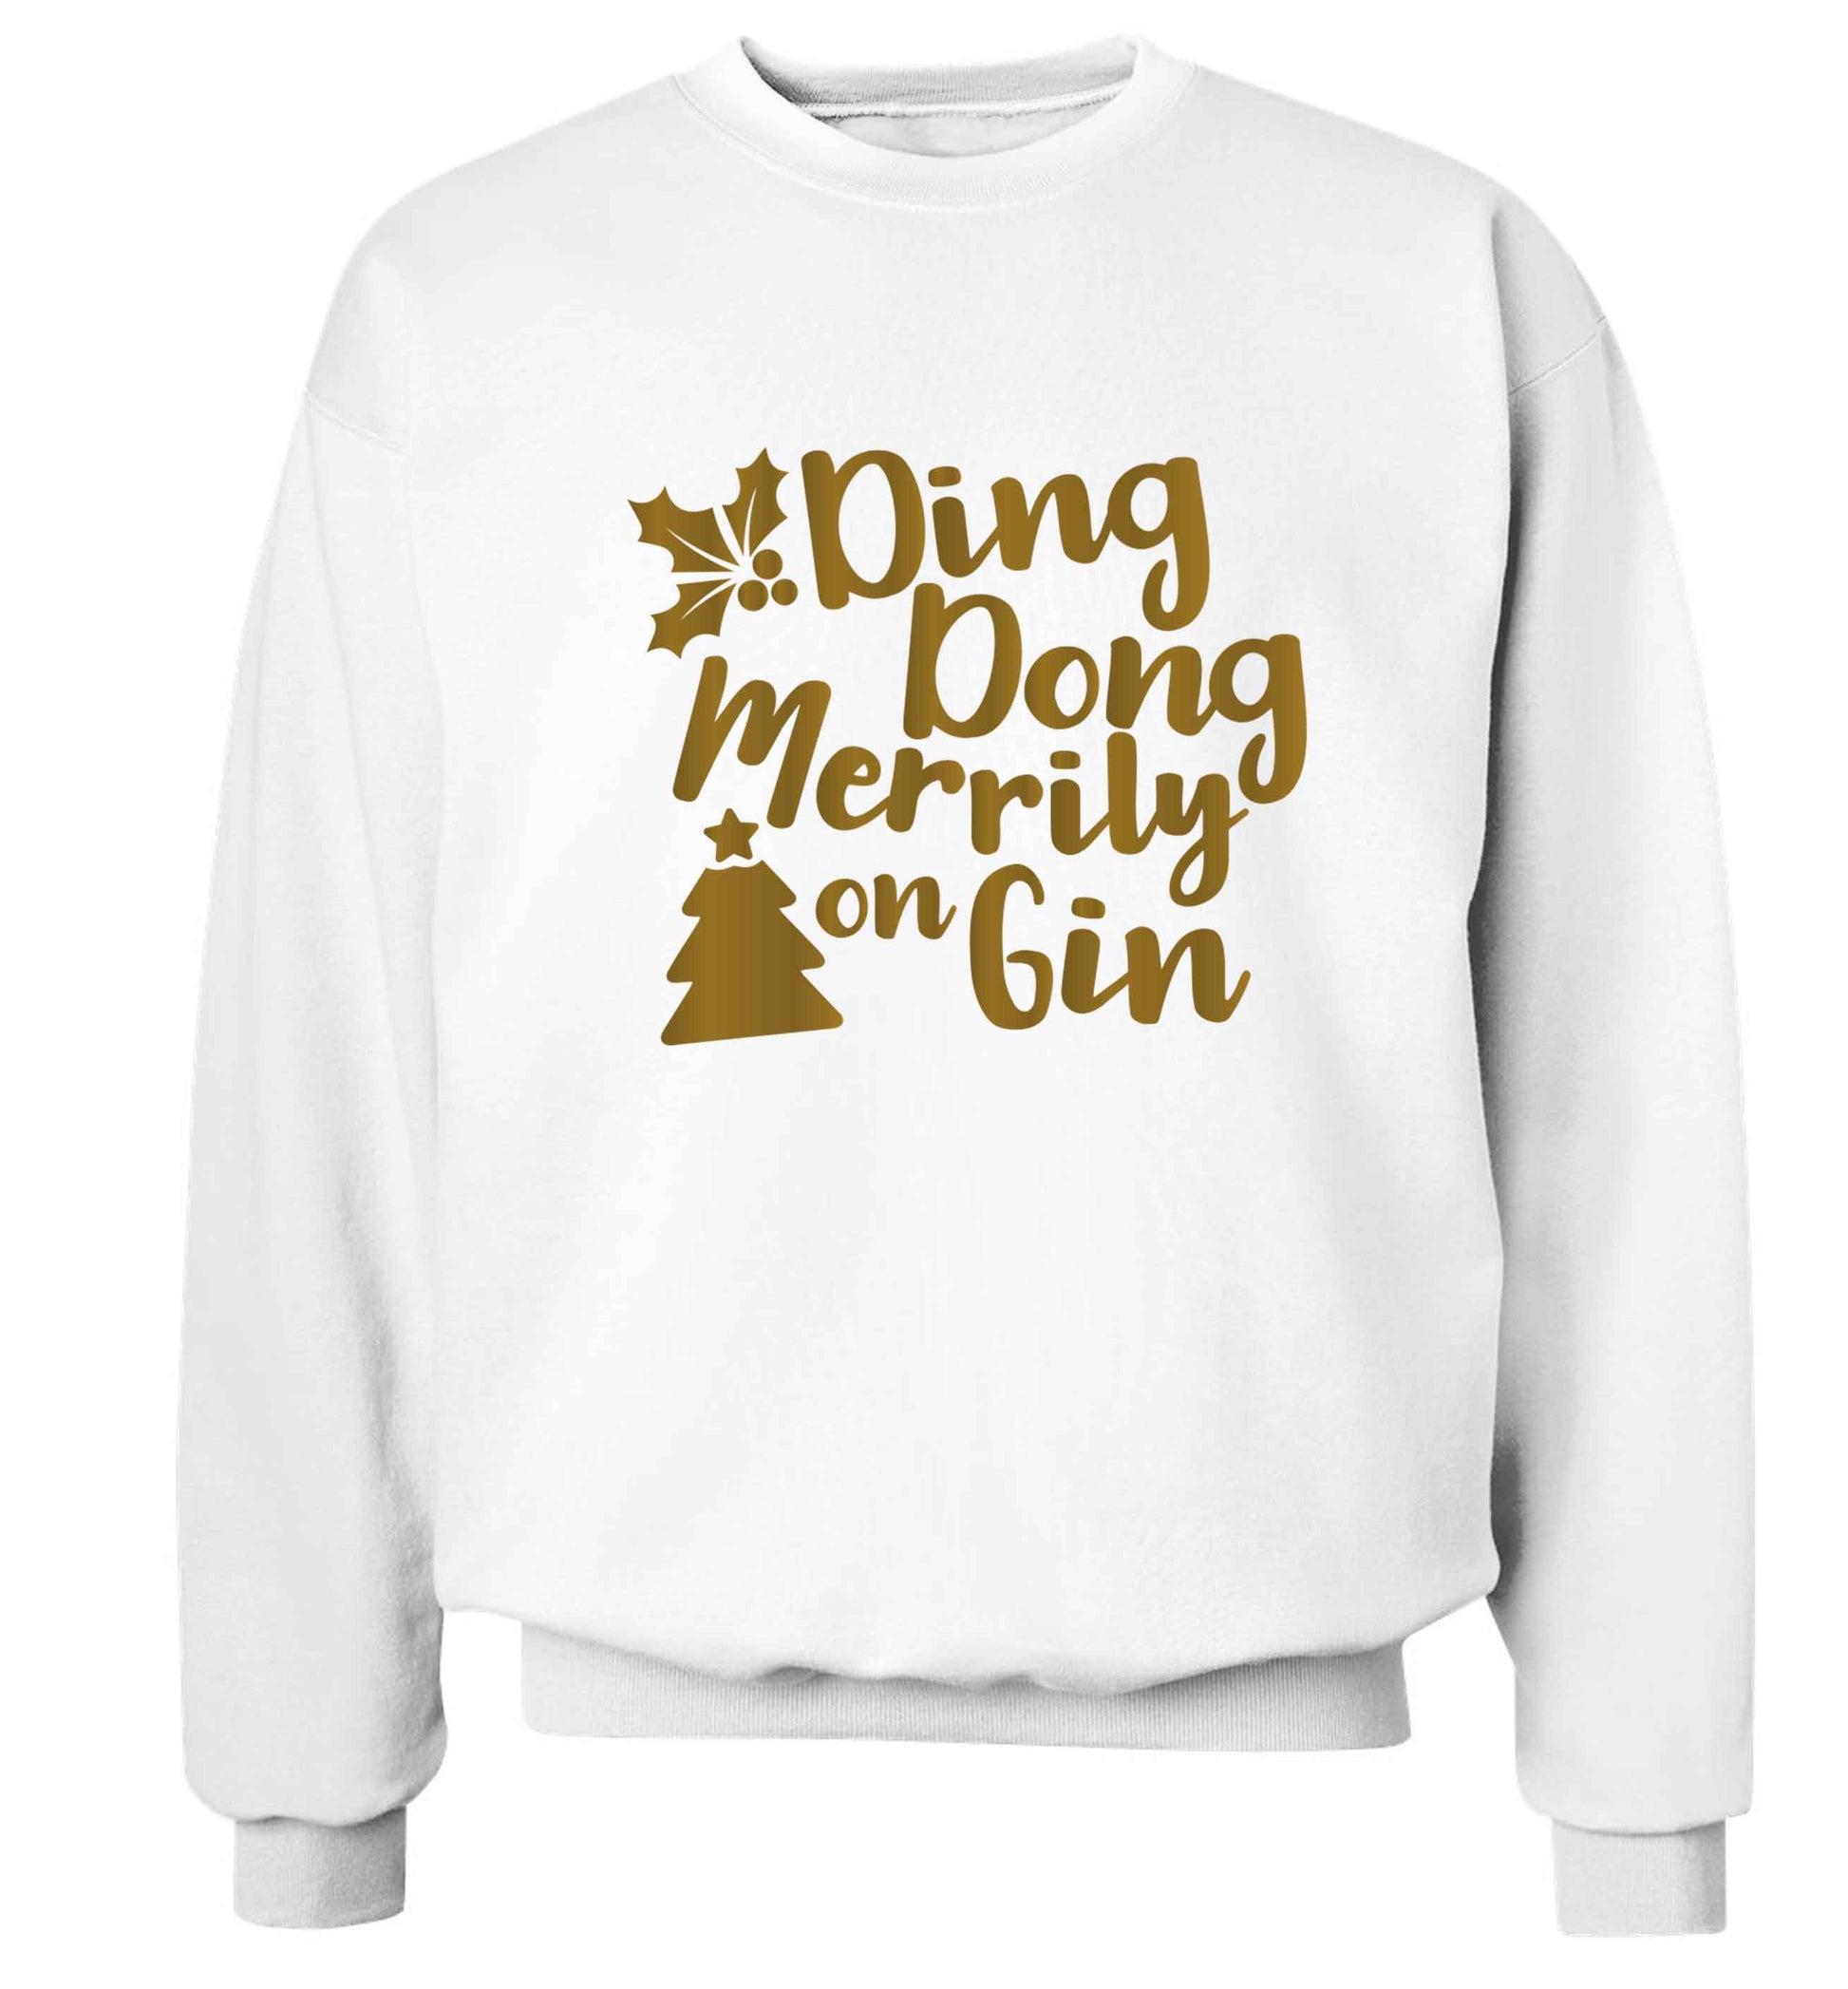 Ding dong merrily on gin Adult's unisex white Sweater 2XL